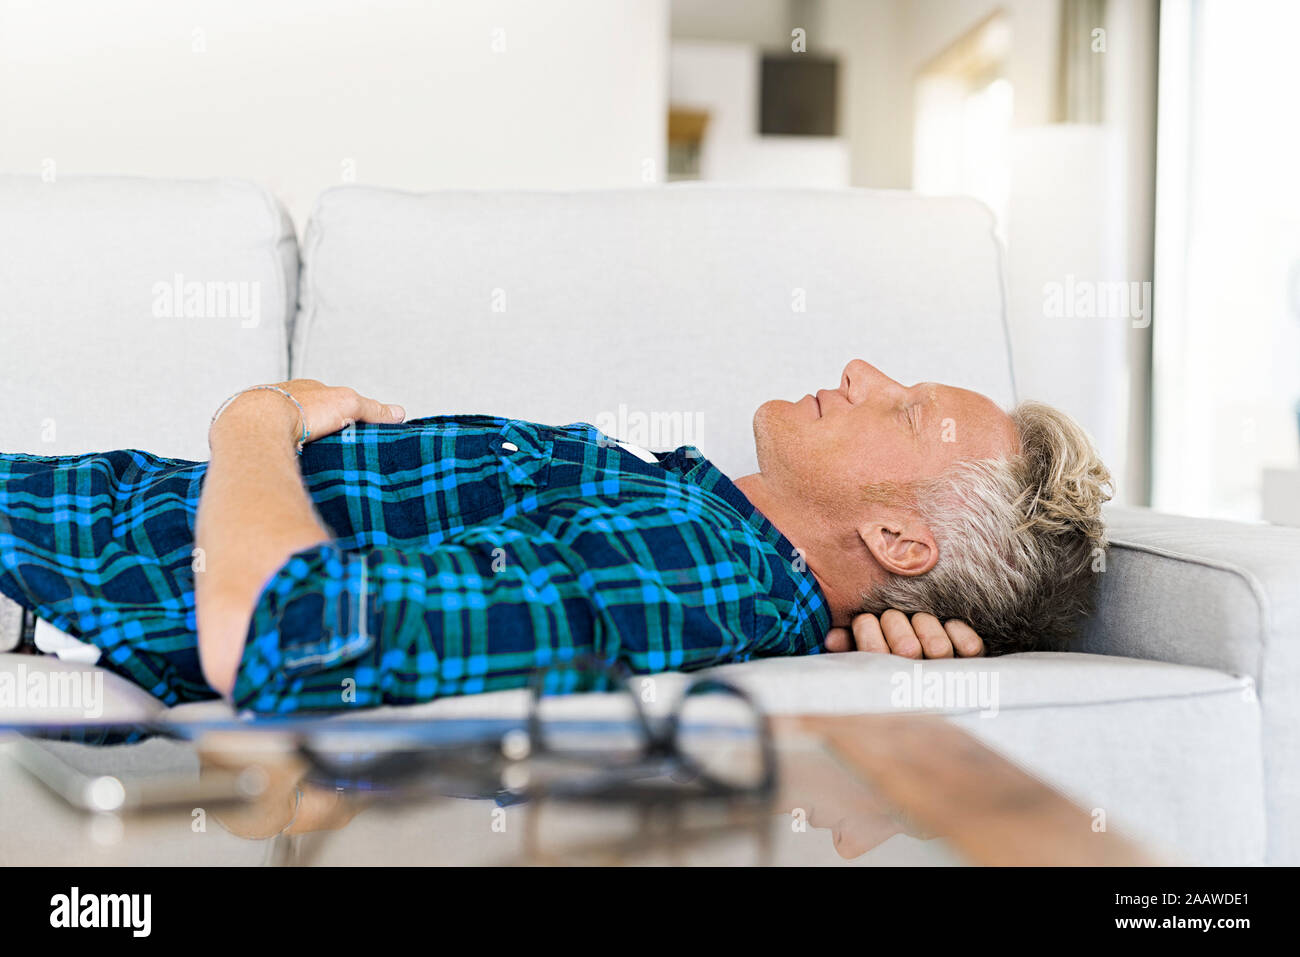 Casual man lying on couch relaxing Stock Photo